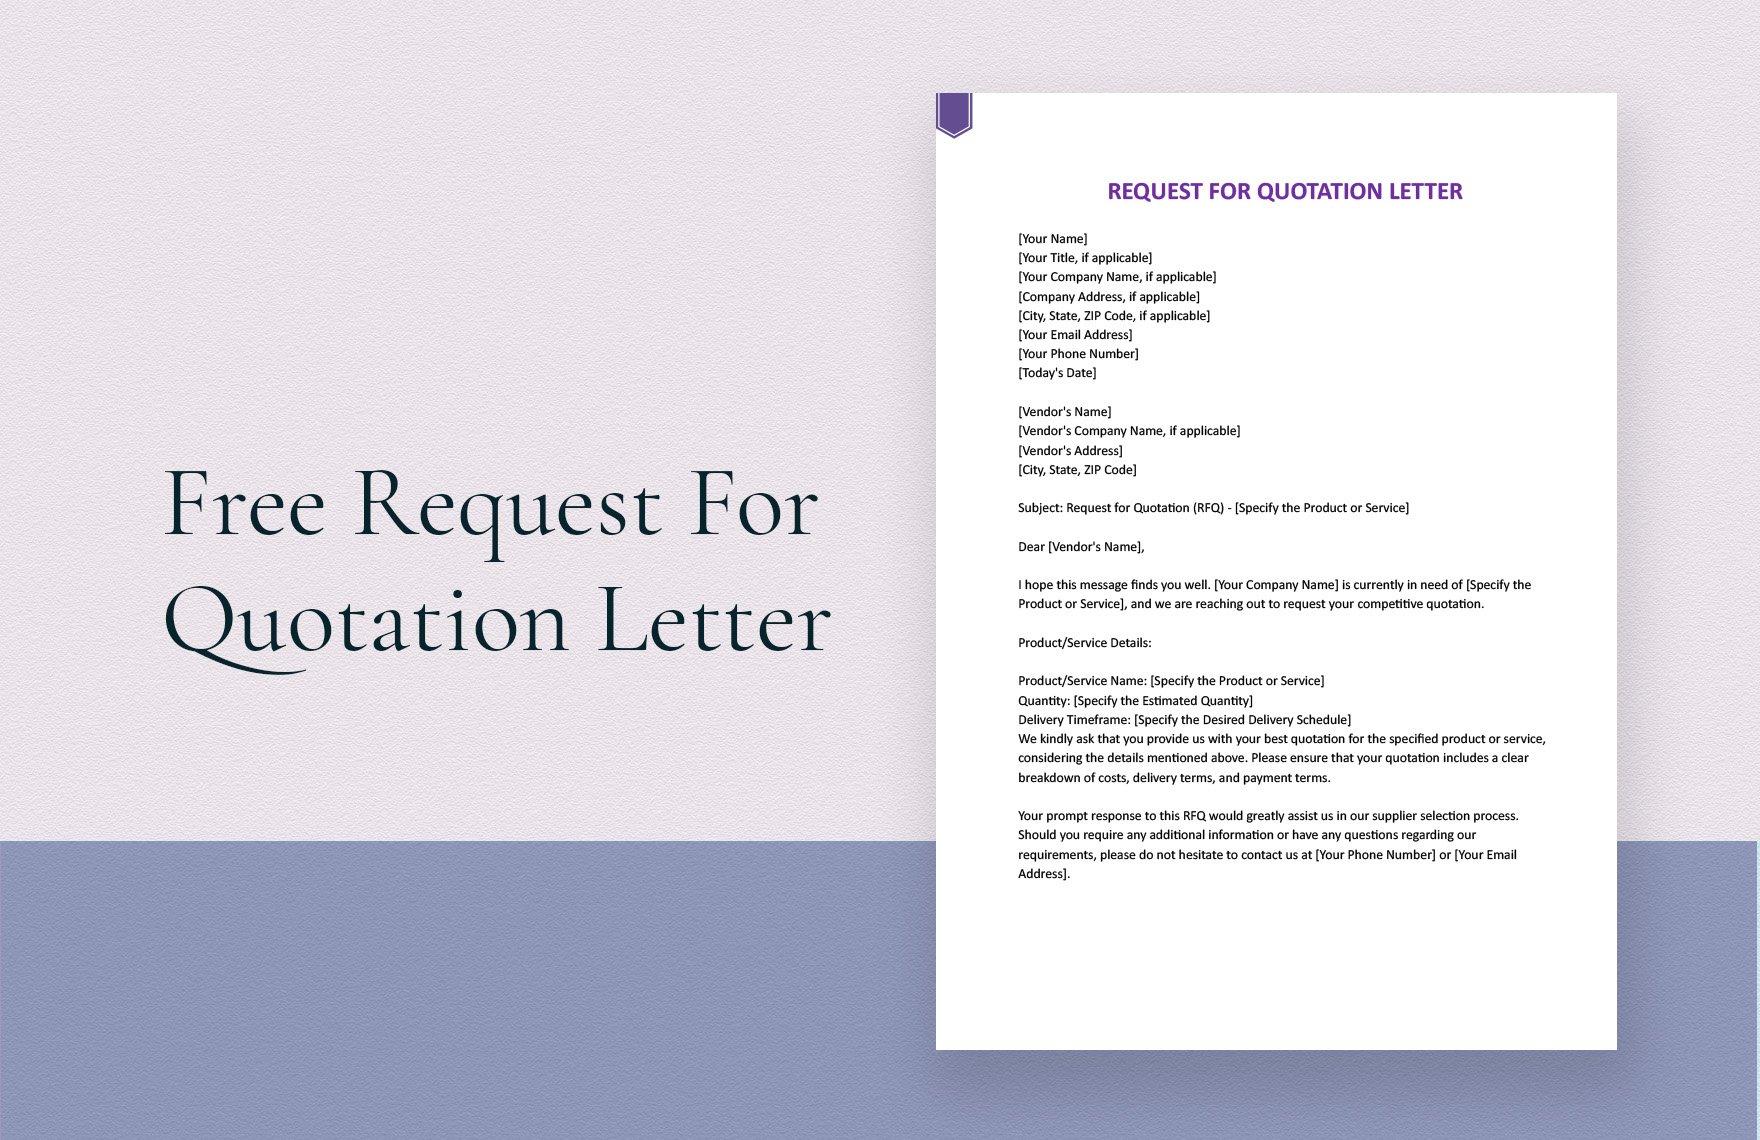 Request For Quotation Letter